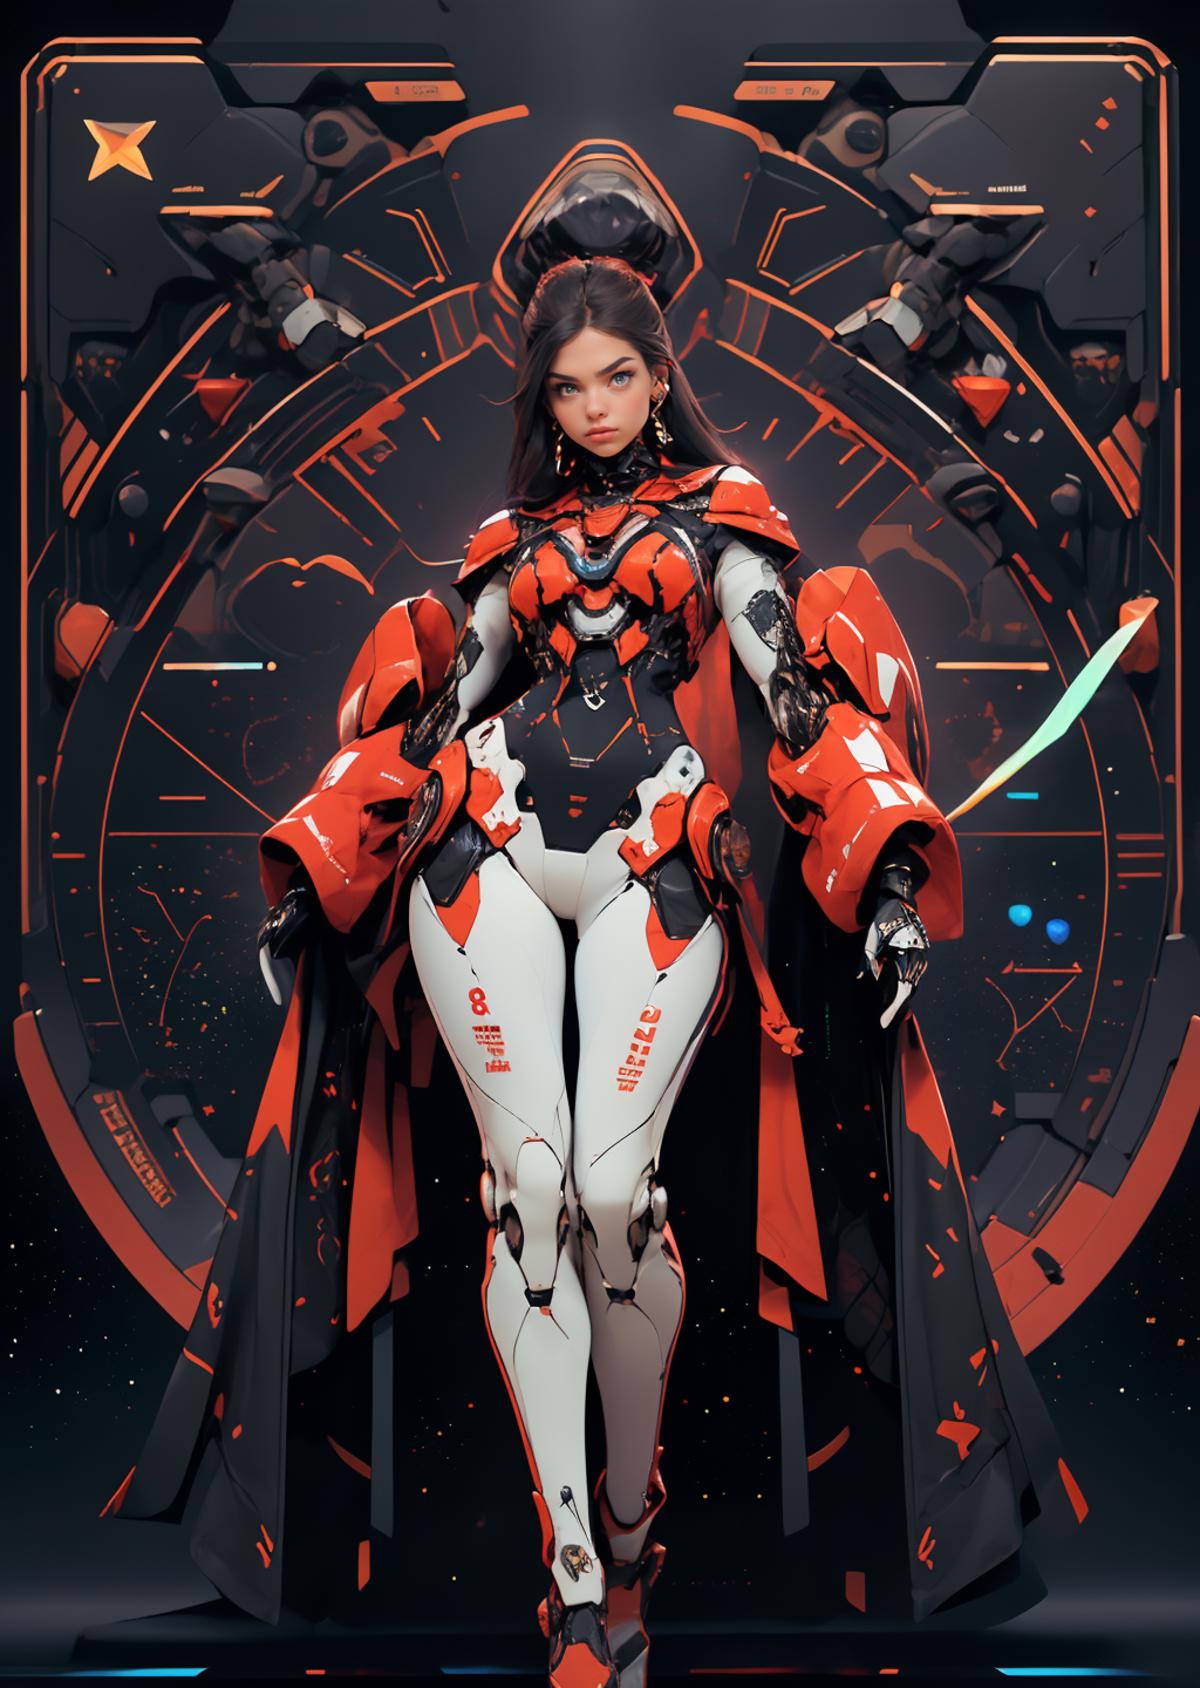 Futuristic Anime Character with a Red and White Outfit and Robotic Elements.